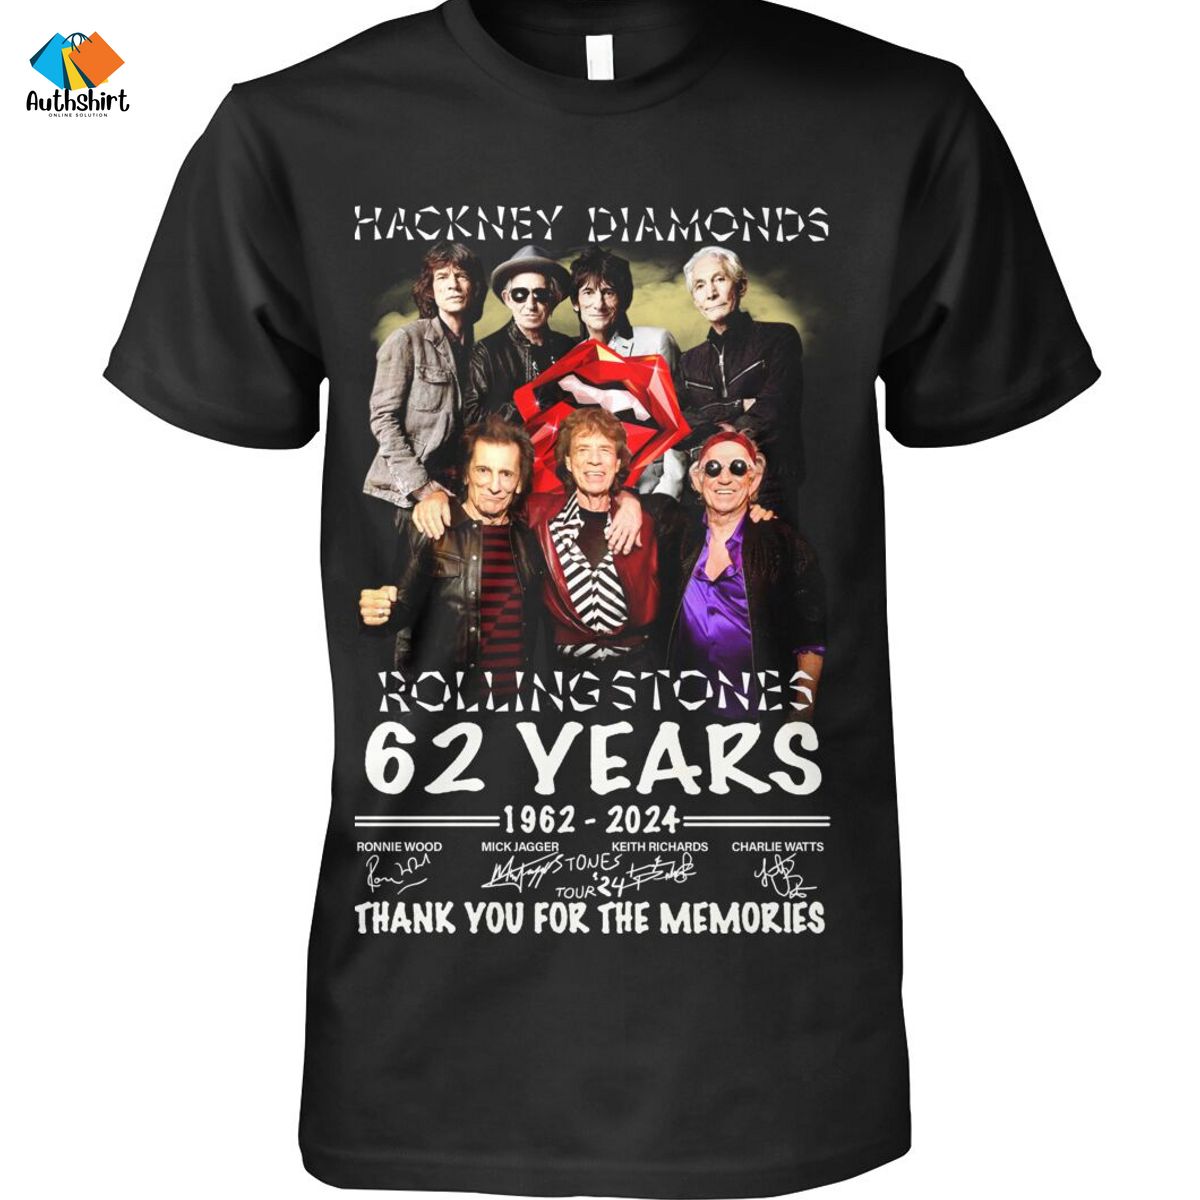 Hackney Diamonds Rolling Stones 62 years thank you for the memories shirt